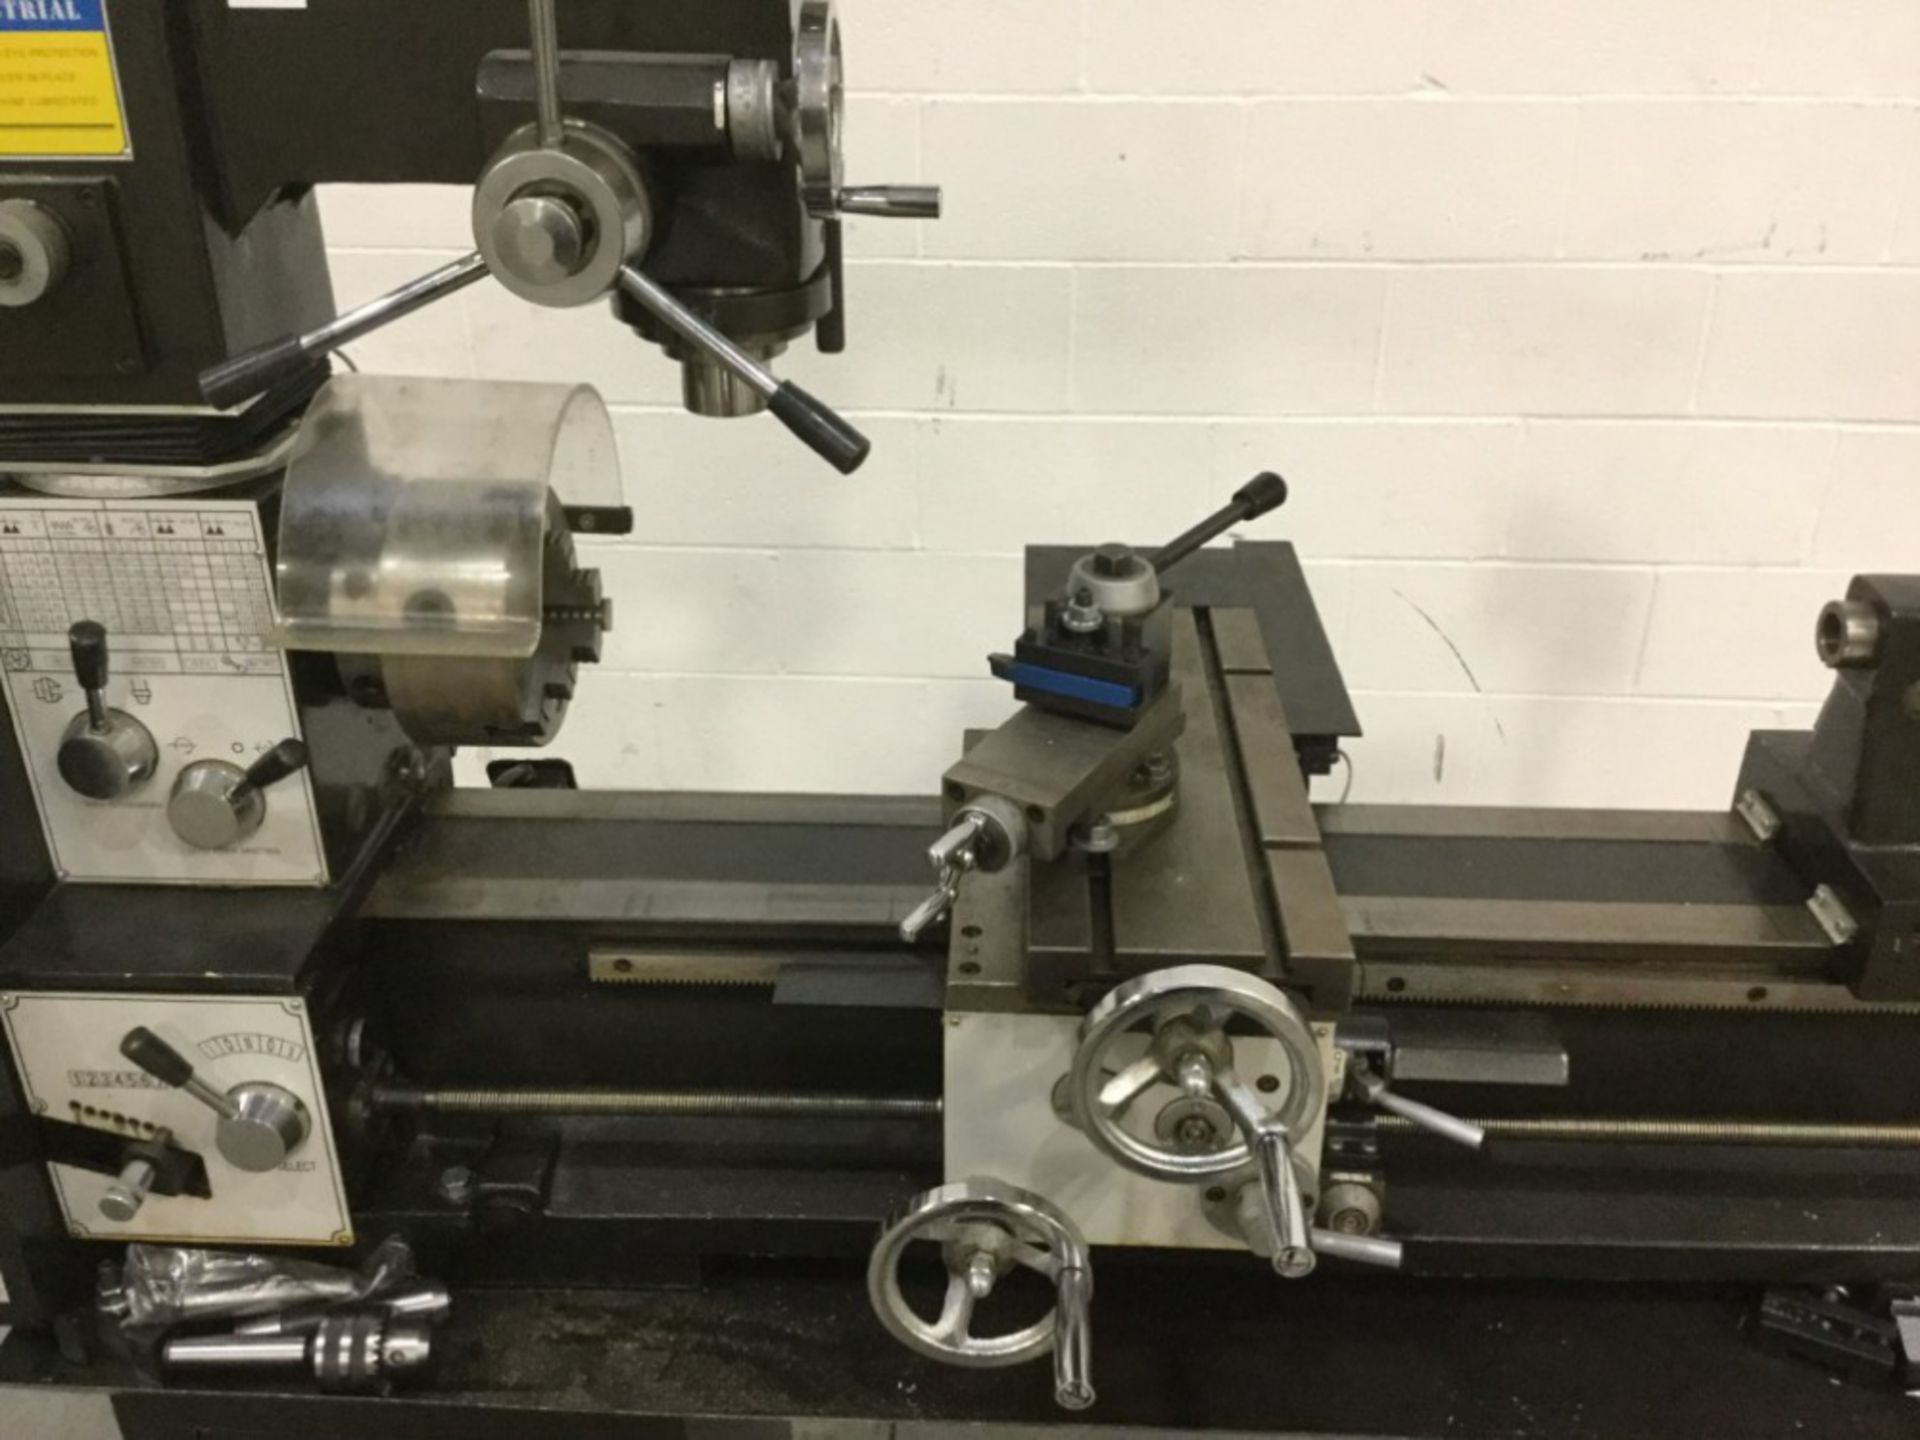 Smithy G1340-I Bench Top 3-in-1 Drilling and Milling Lathe - Image 5 of 5